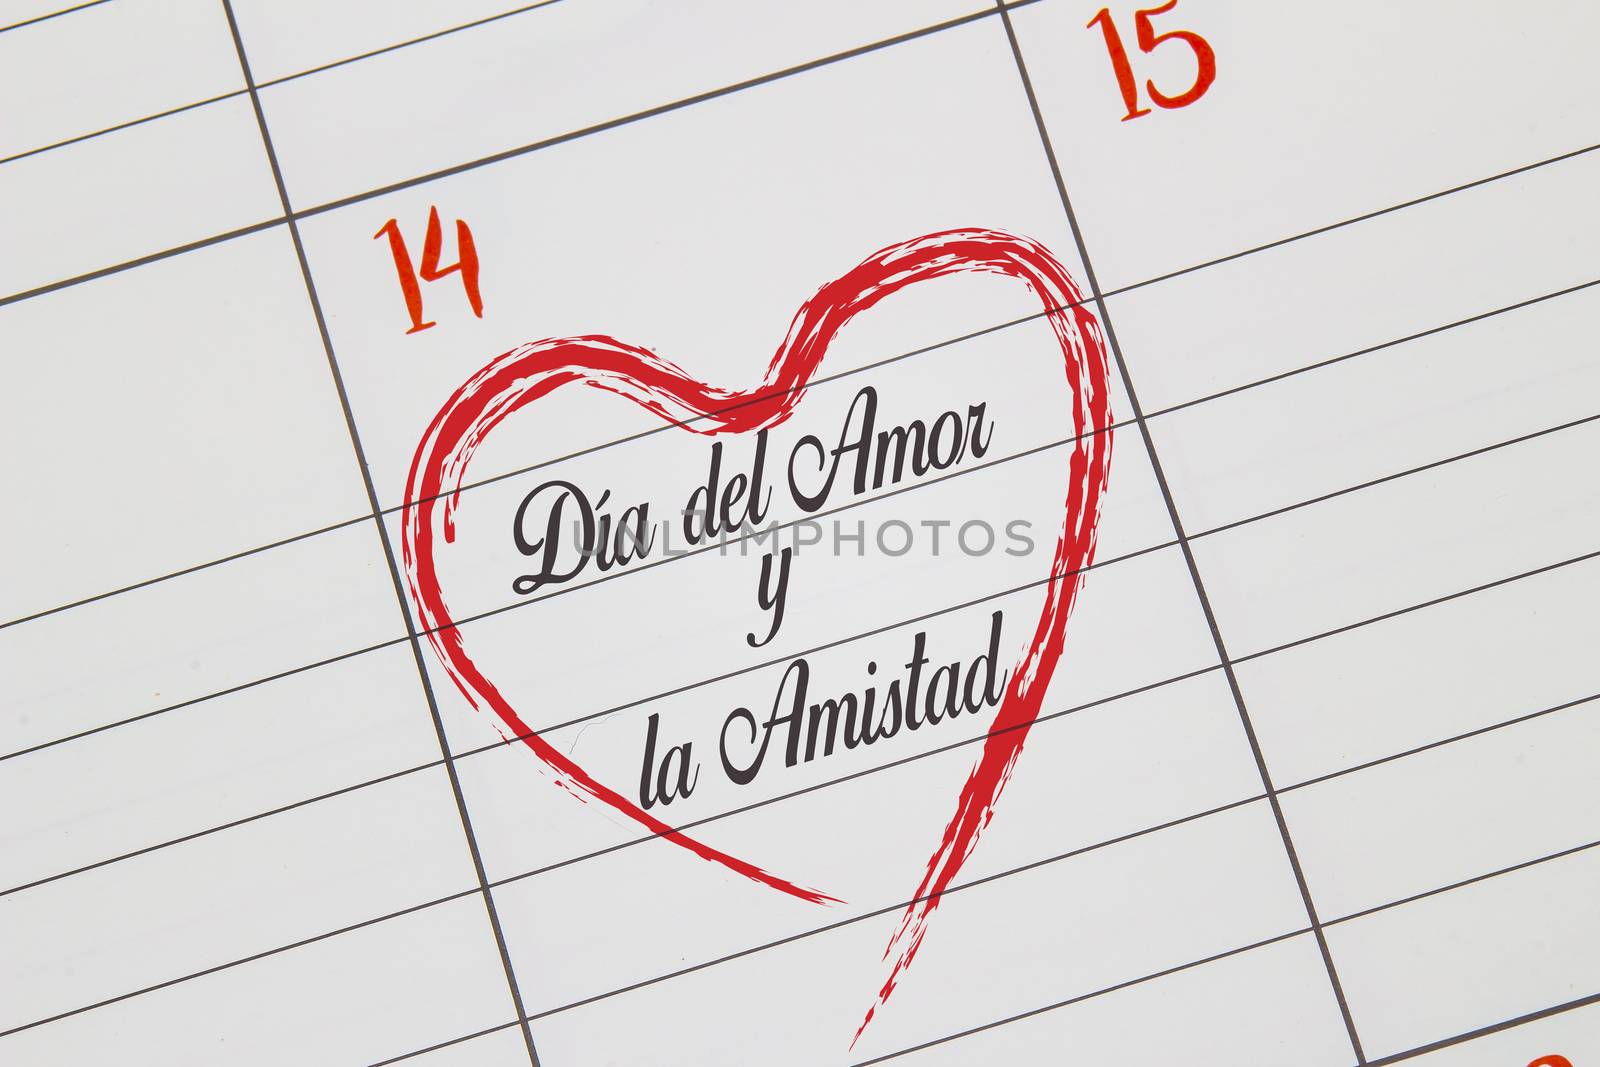 A close up to a Calendar on Feb 14 with the text on Spanish: "Día del Amor y la Amistad" in English means Day Of Love And Friendship